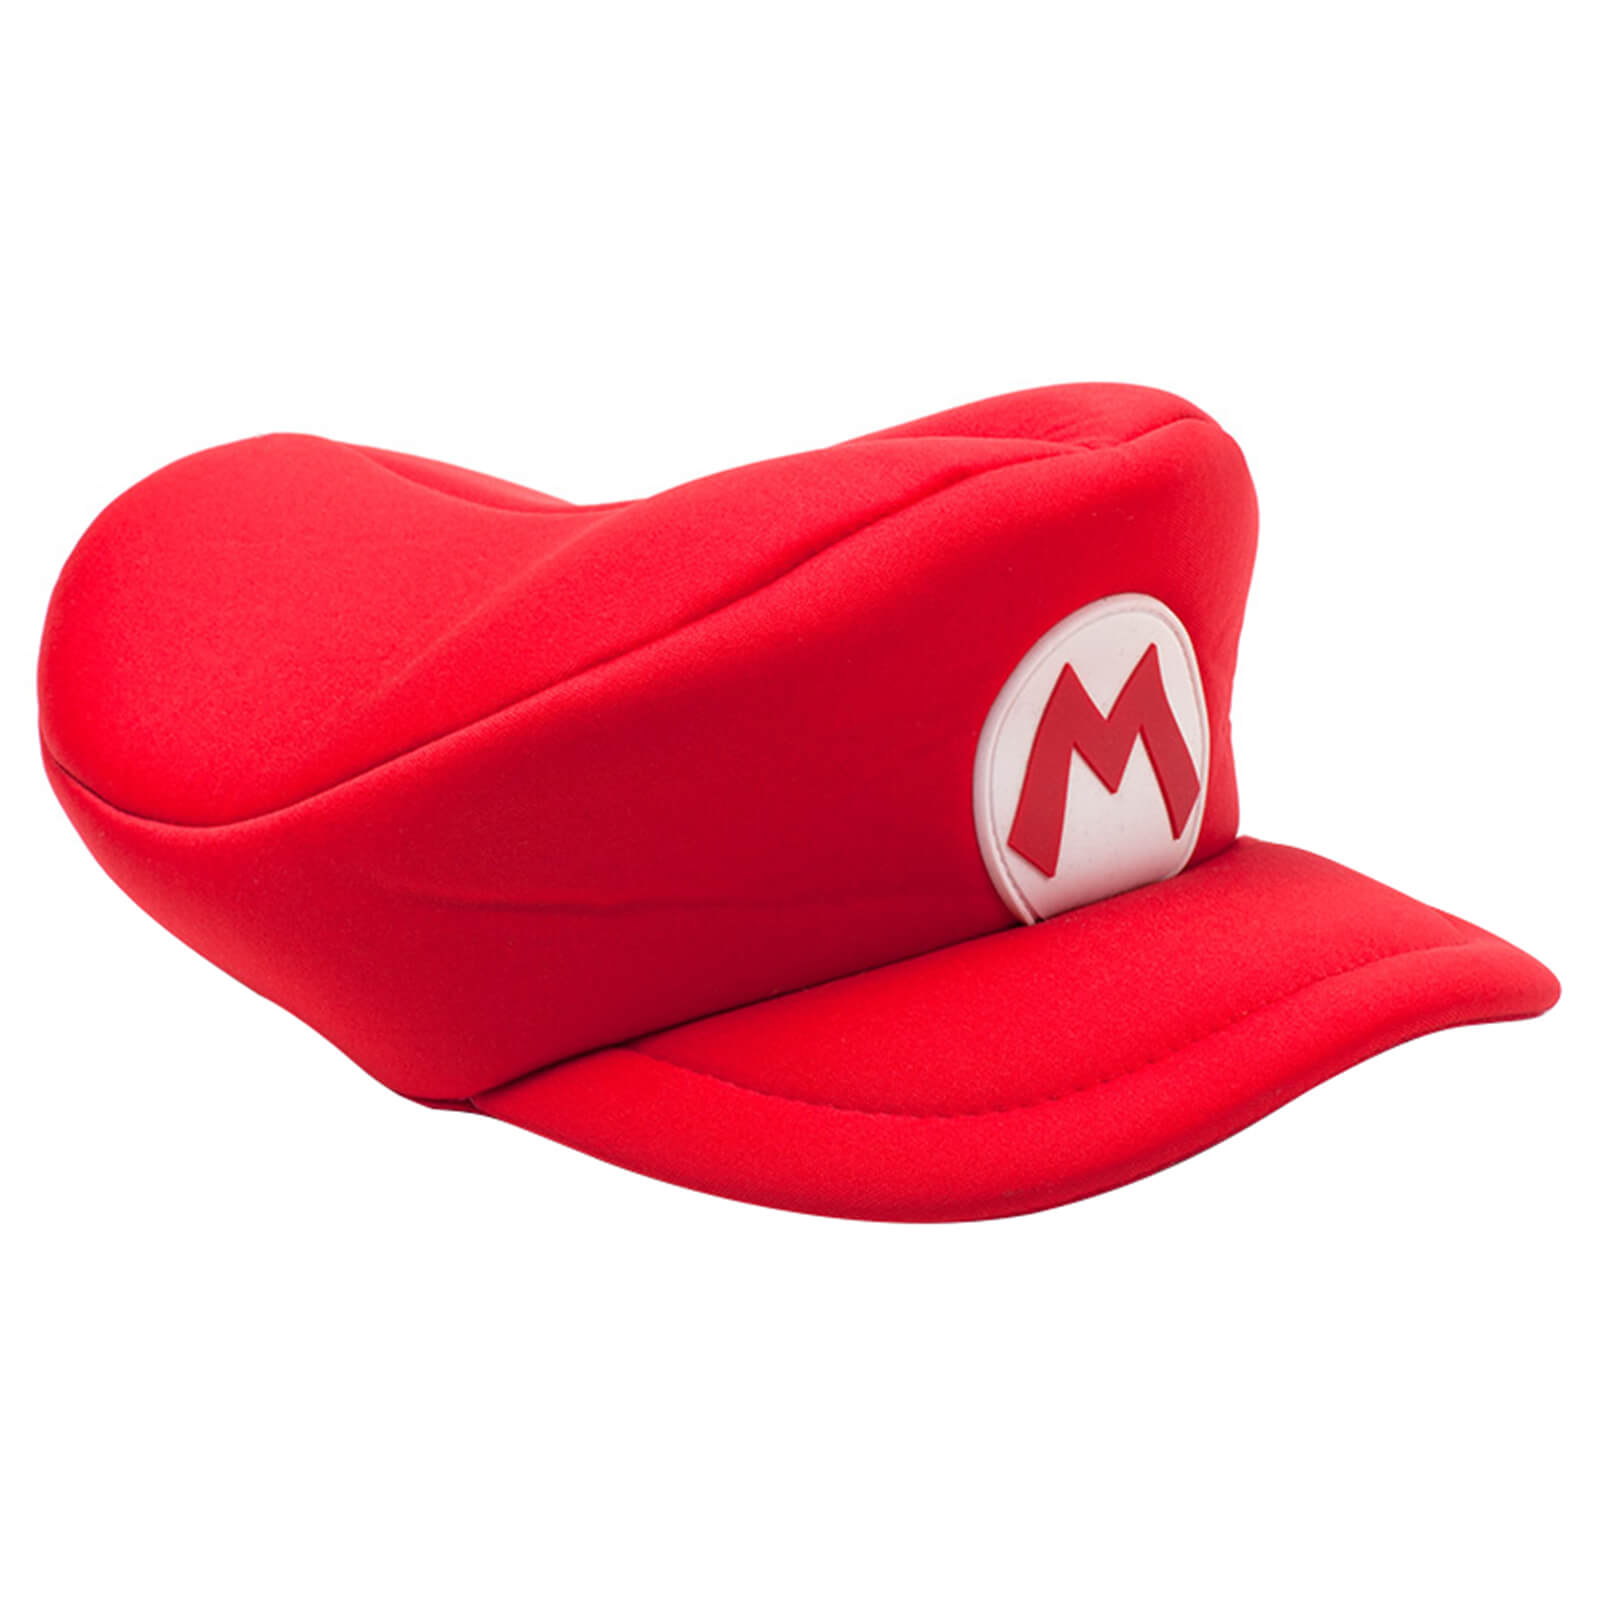 Image result for mario hat"